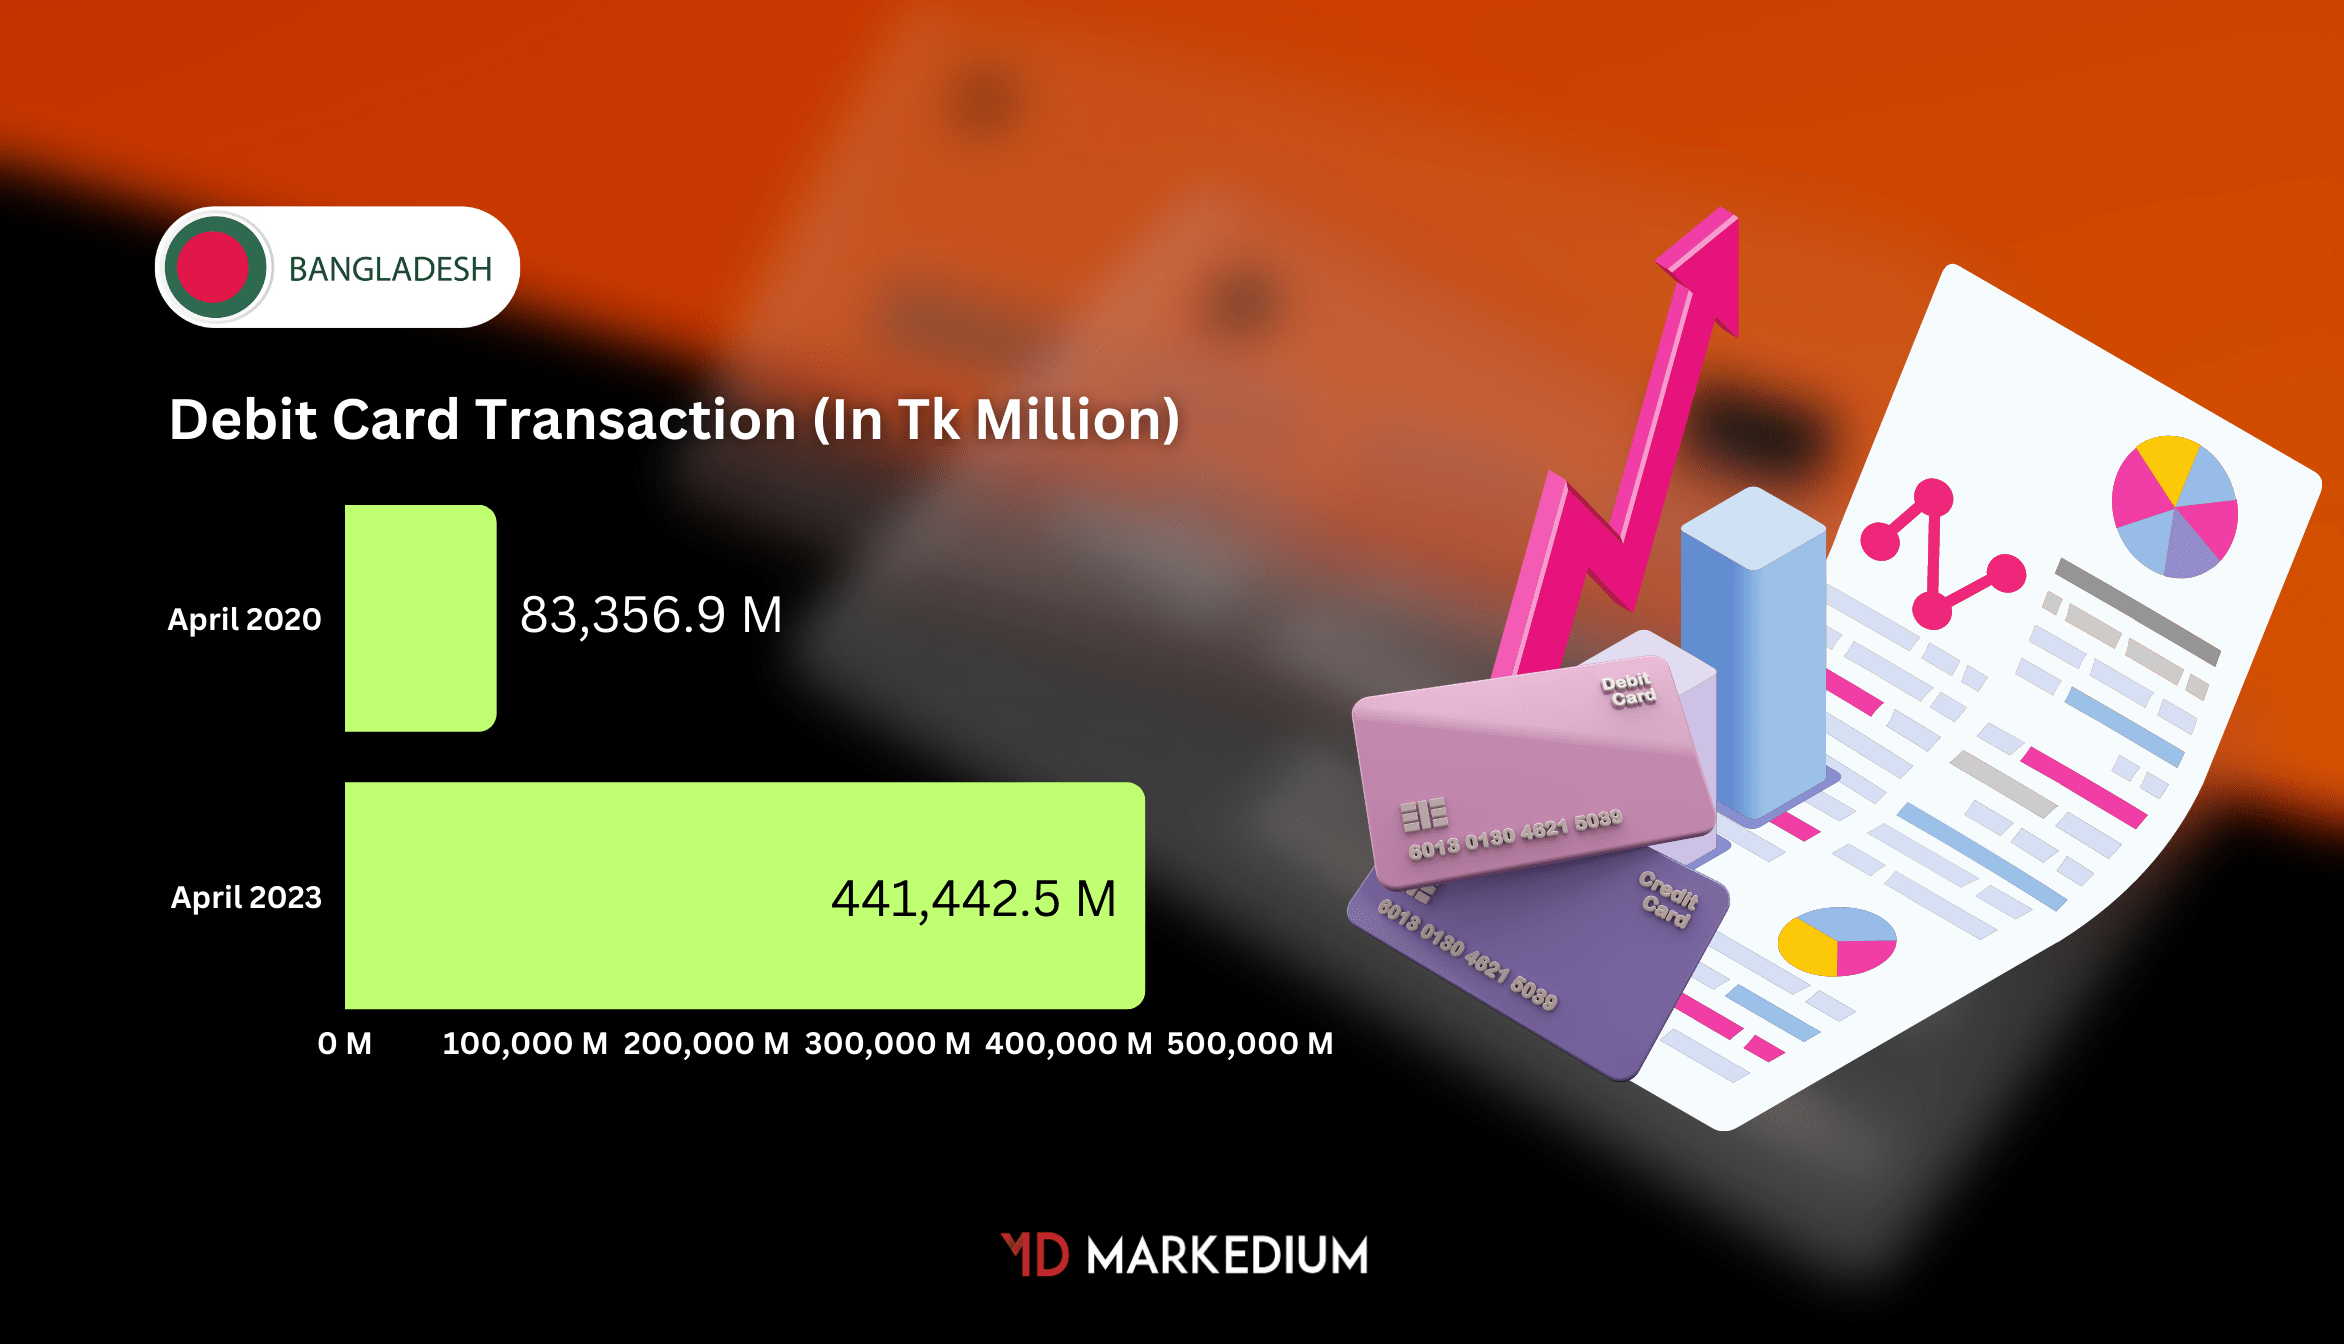 Debit Card Transactions In Bangladesh increased by 32% YoY in April 2023-Markedium